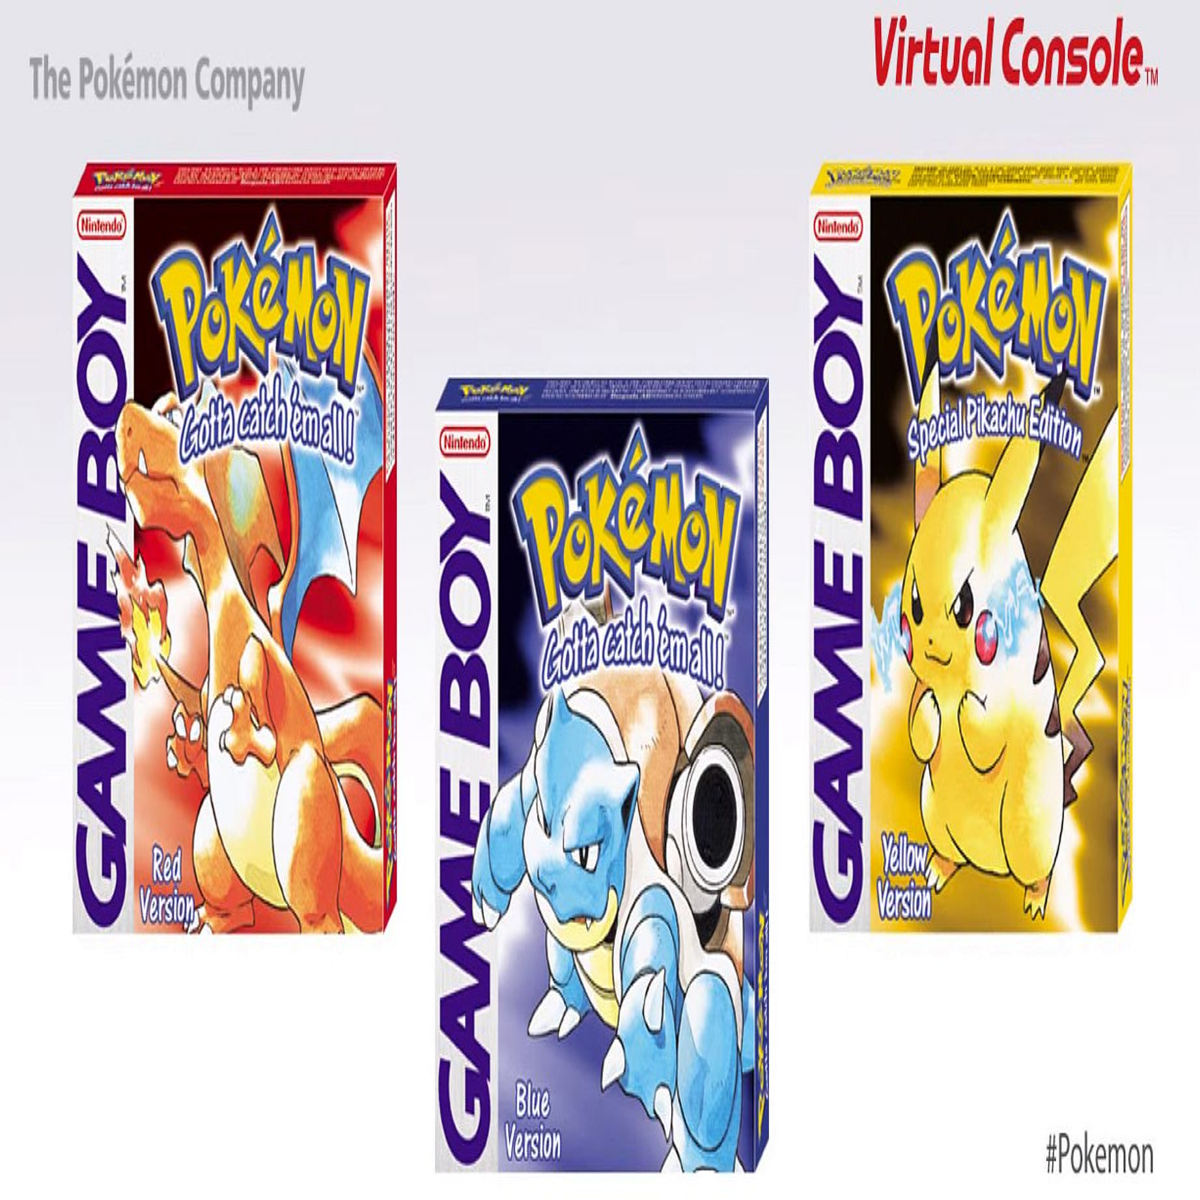 eShop versions of Pokémon Red, Blue and Yellow can transfer to